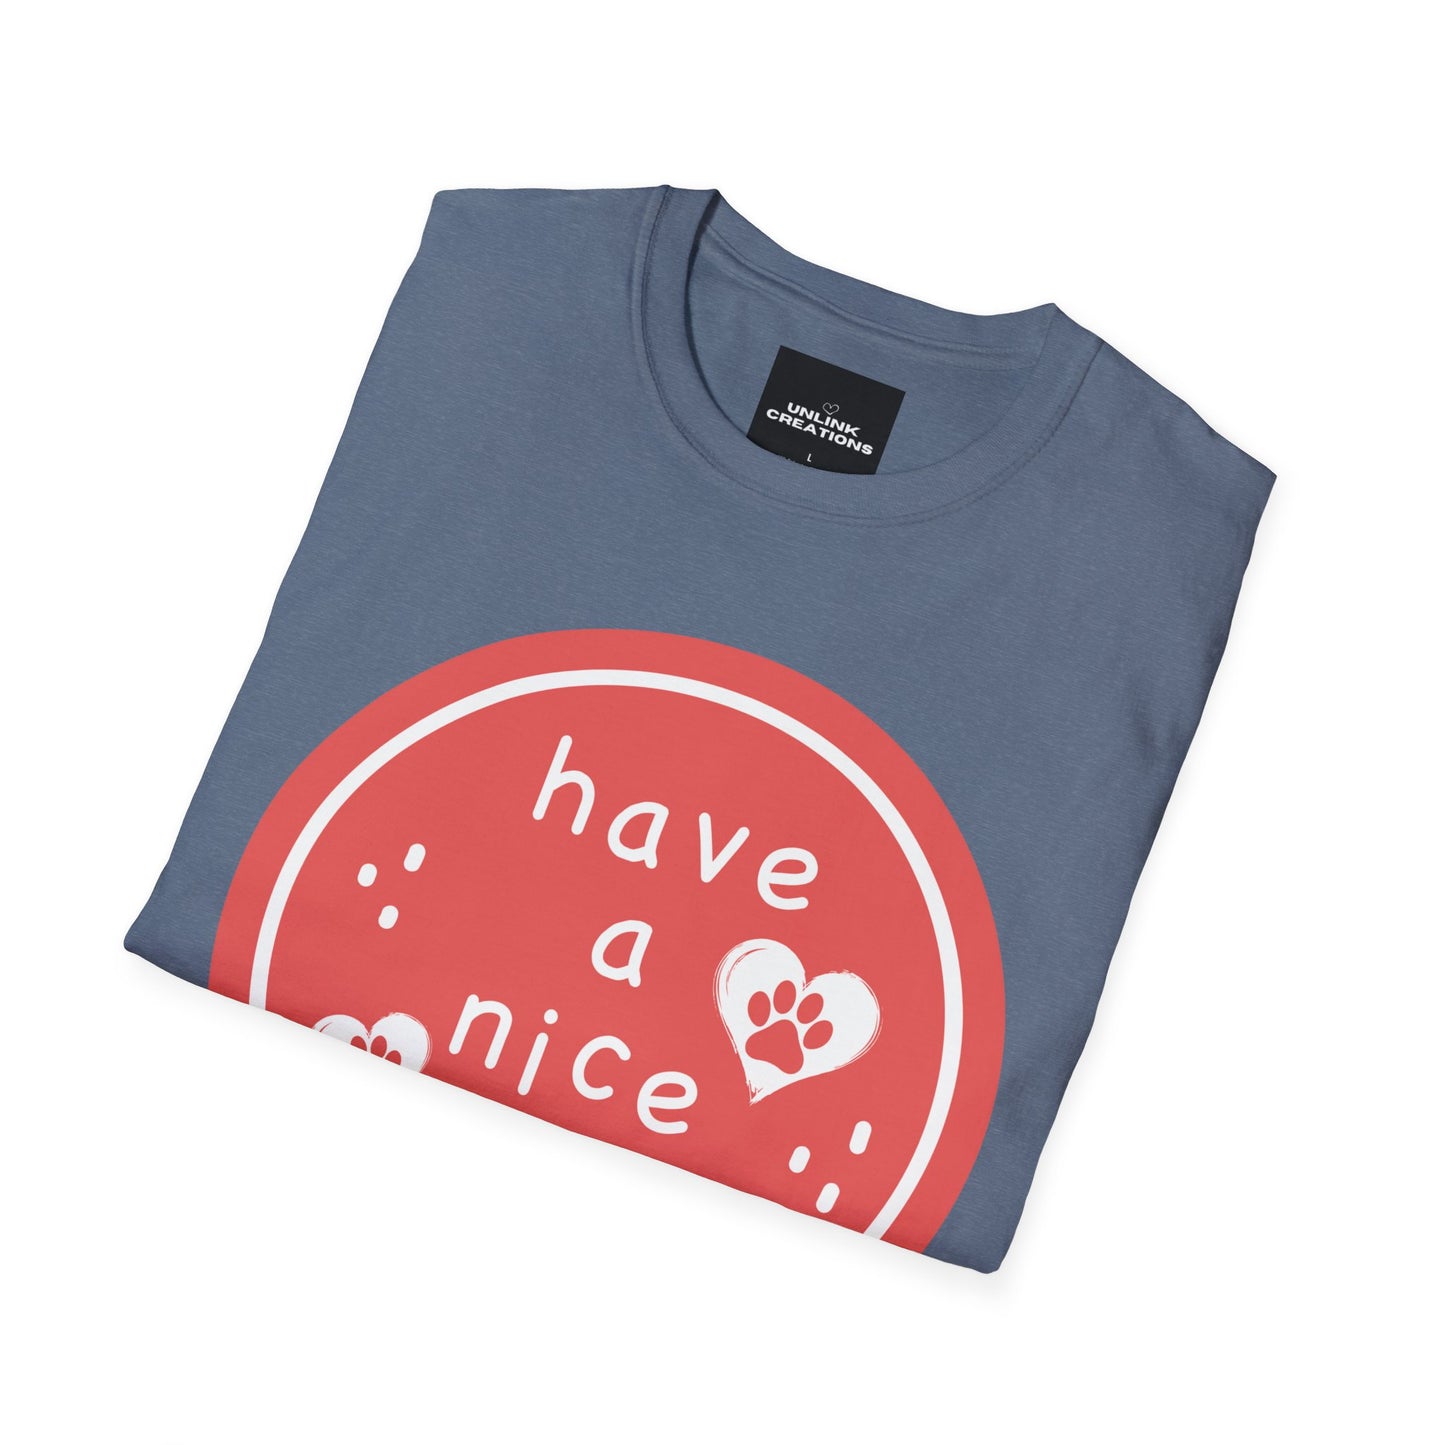 Wish everyone “have a nice day” with this furry friend inspired Unisex Softstyle T-Shirt.